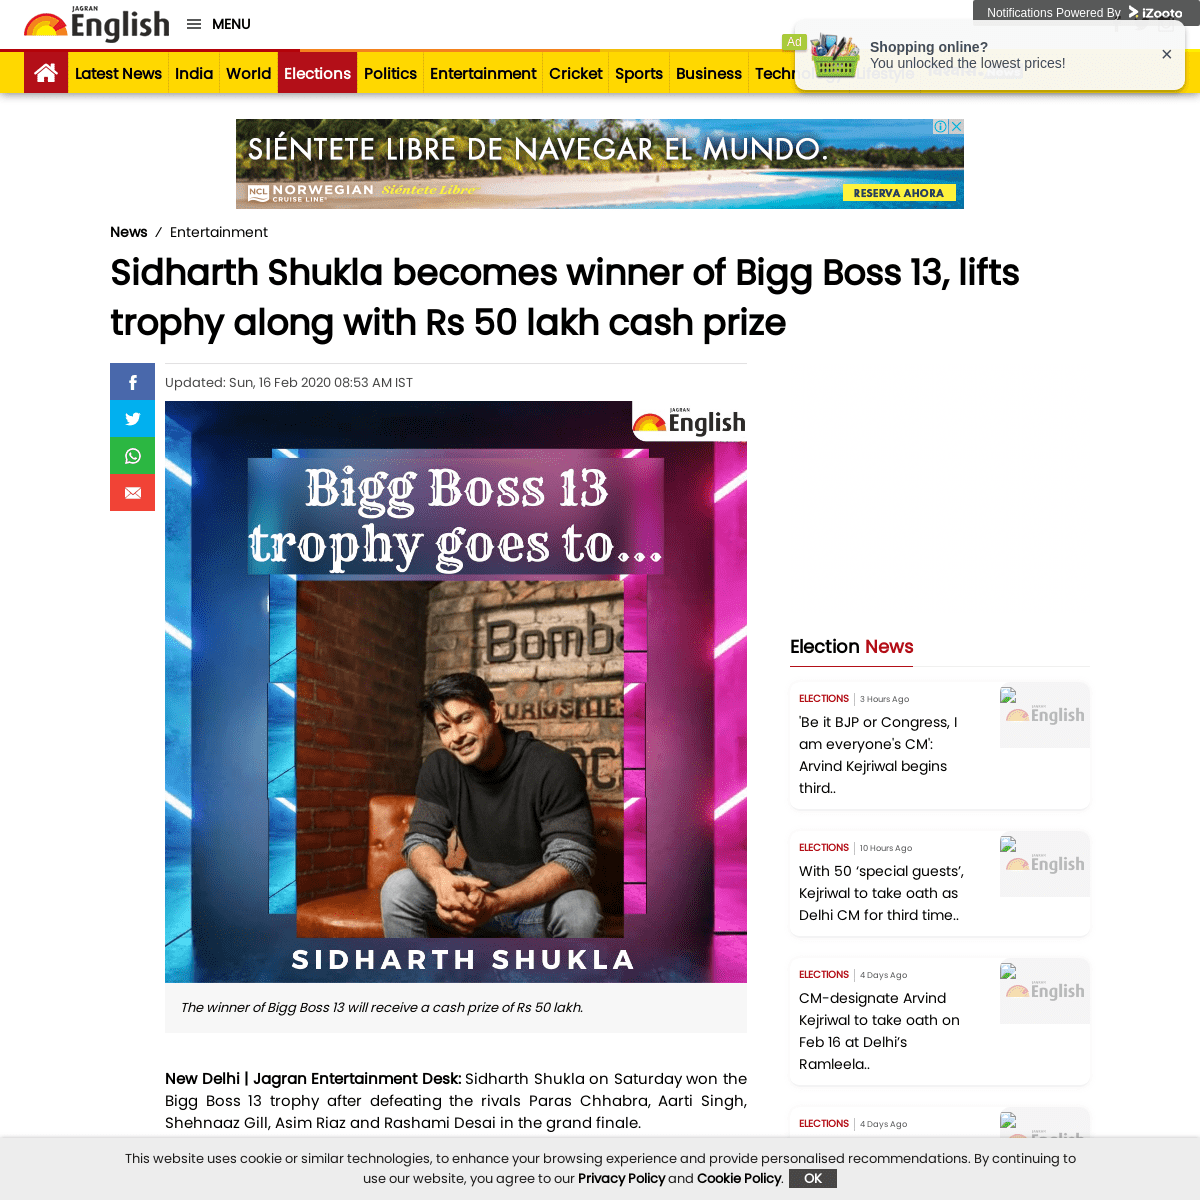 A complete backup of english.jagran.com/entertainment/sidharth-shukla-becomes-winner-of-bigg-boss-13-lifts-trophy-along-with-50-